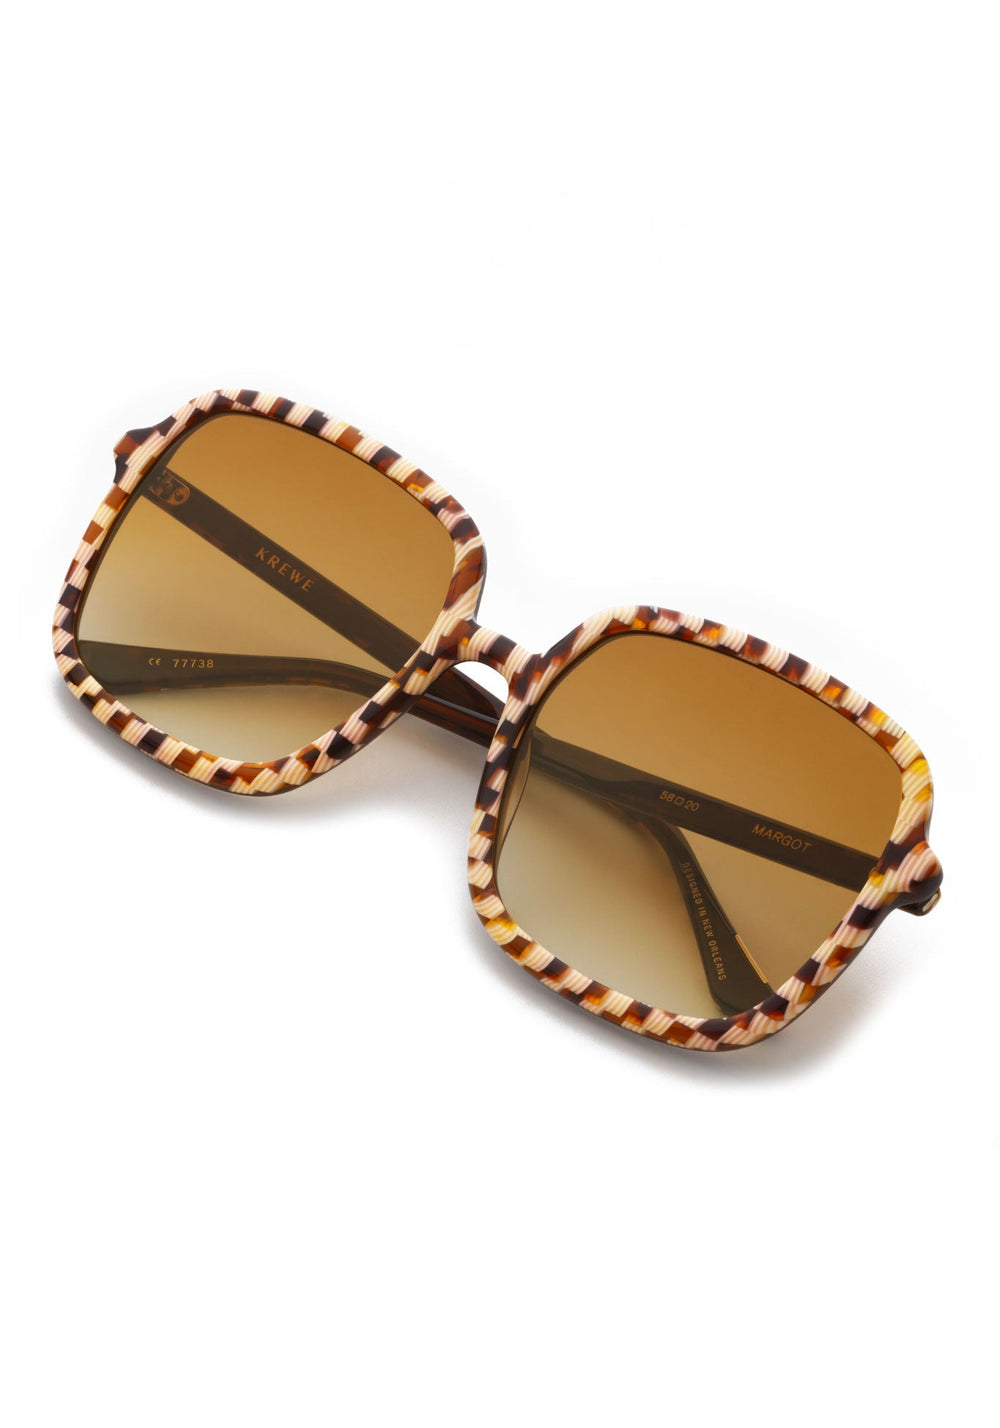 KREWE SUNGLASSES - MARGOT | Caffe Dolce + Custom Vanity Tint handcrafted, luxury oversized square checkered sunglasses with orange tinted lenses